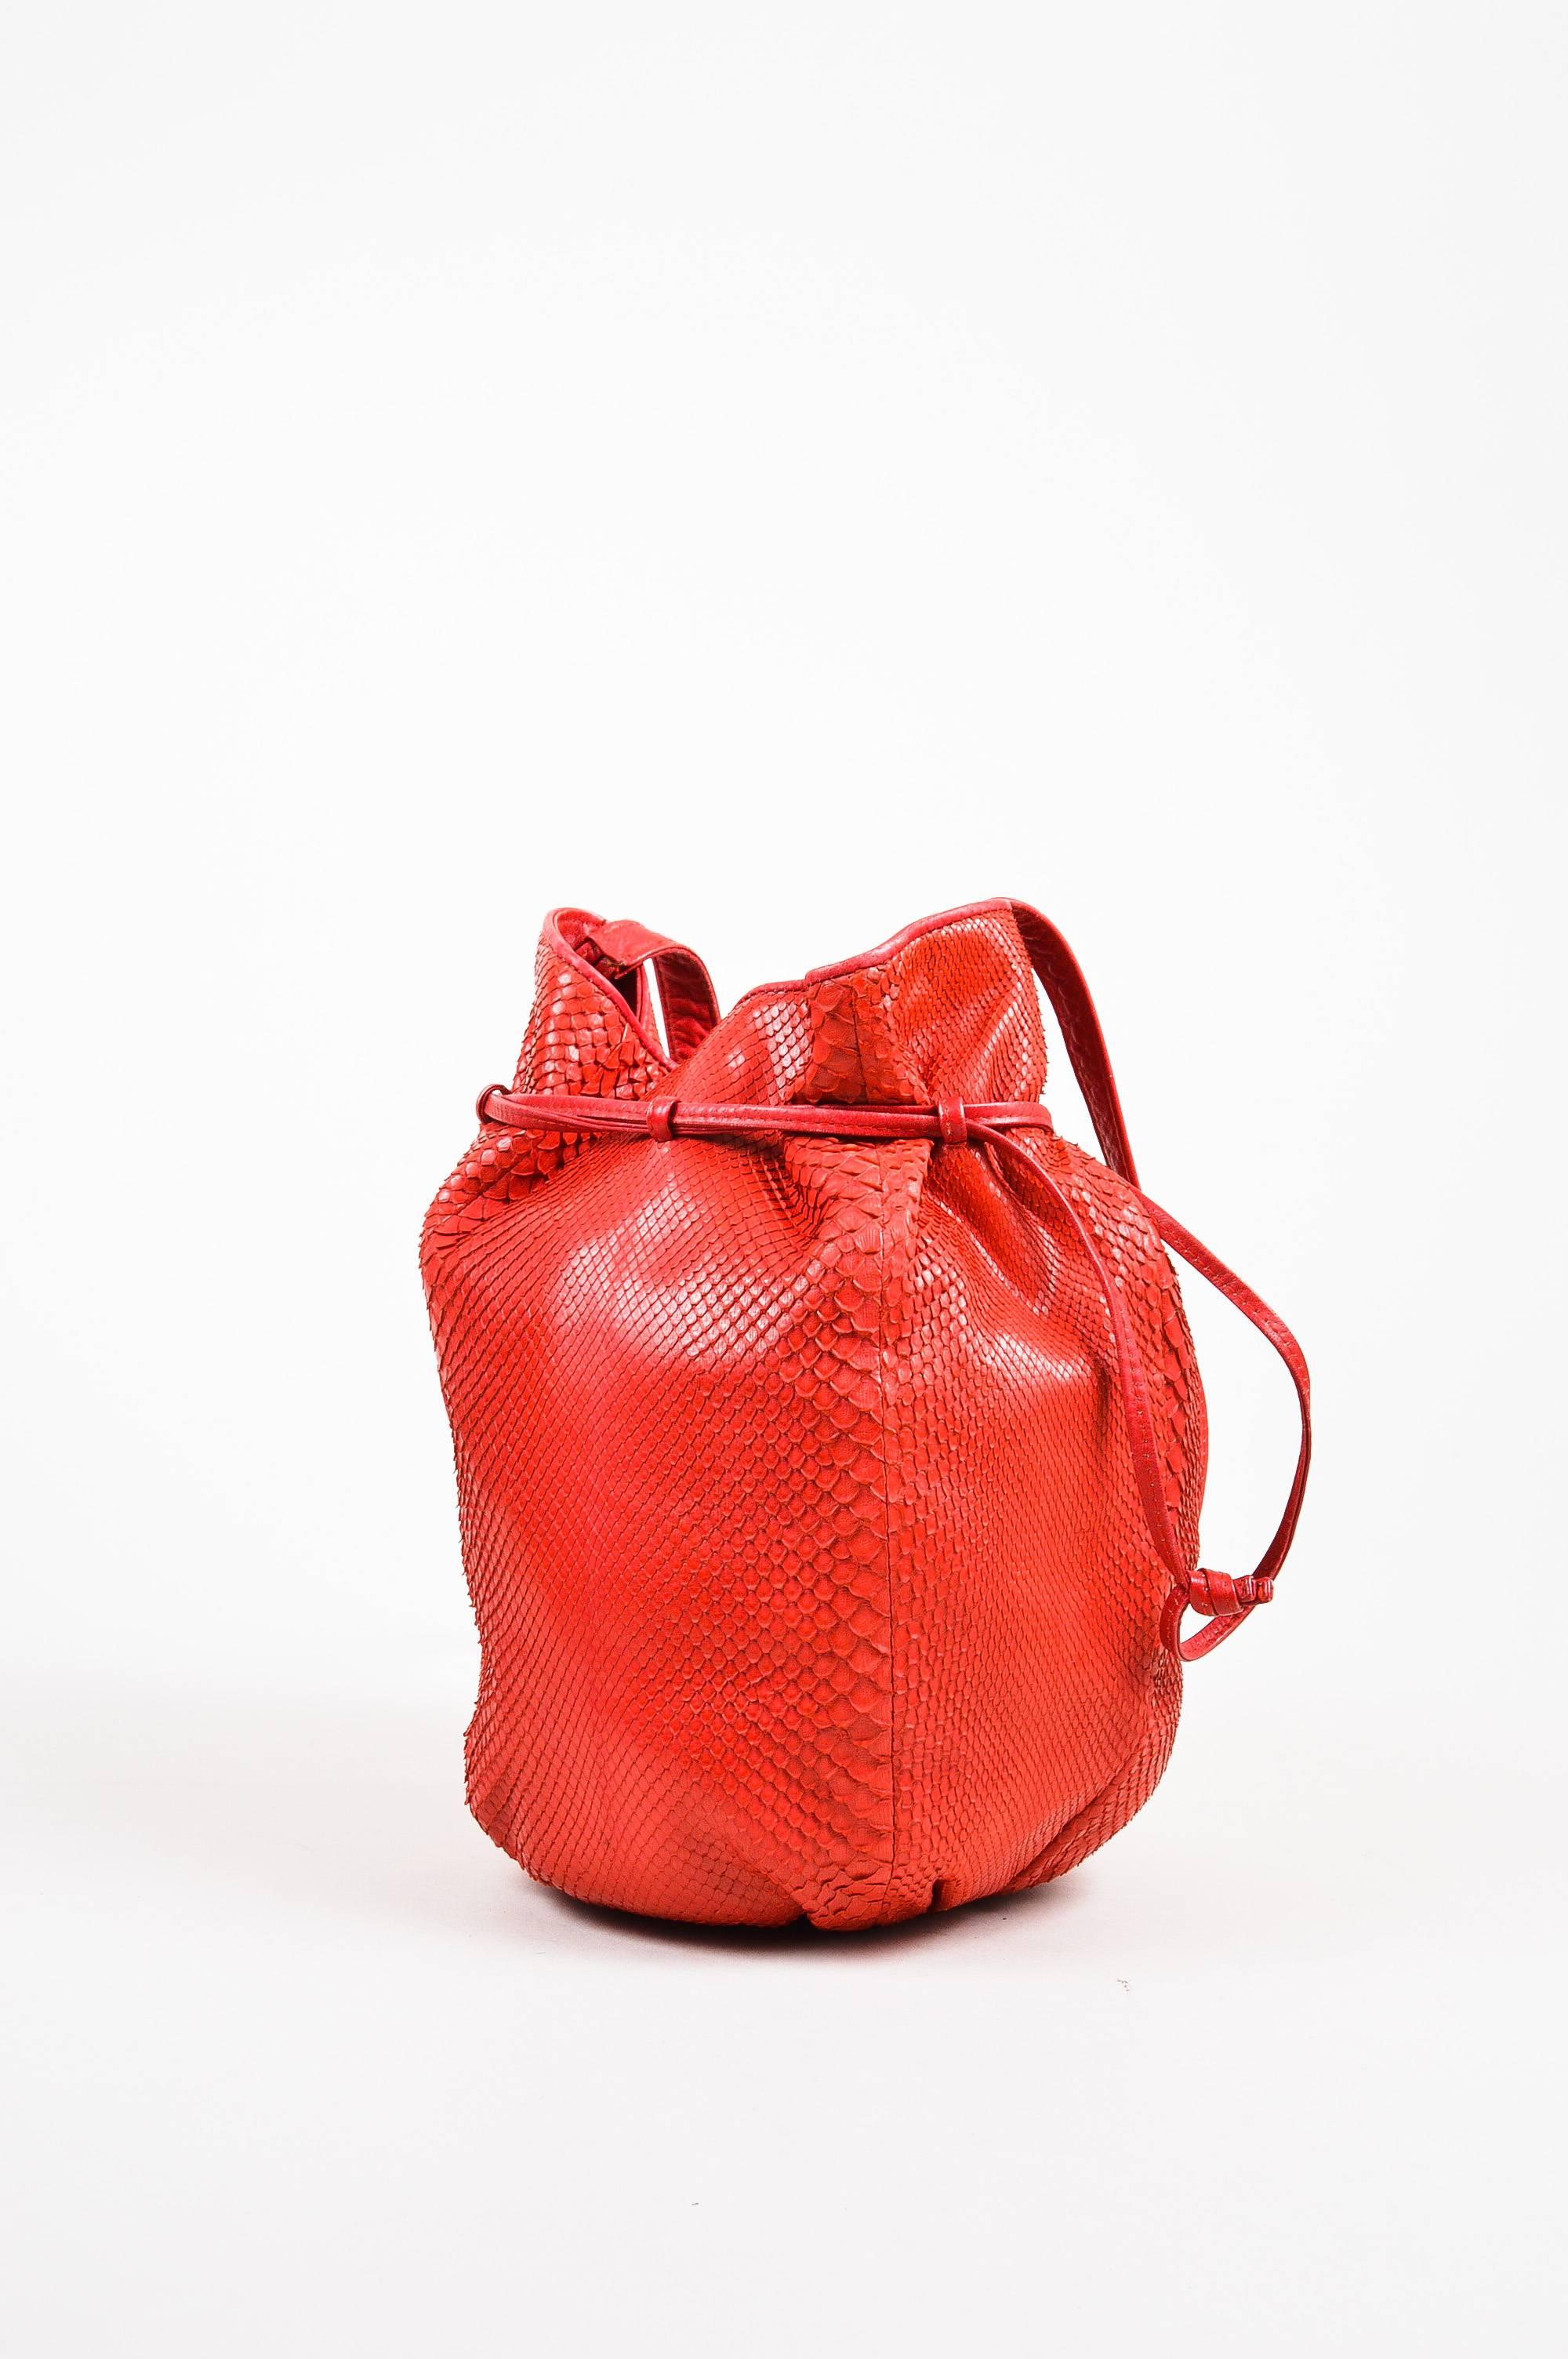 This brightly colored bag would pair well with a black chunky knit sweater and dark wash skinny jeans. Comes with a mirror. Red genuine snakeskin leather bucket bag from Bottega Veneta. Drawstring ties along the upper edge. Single strap for wear.